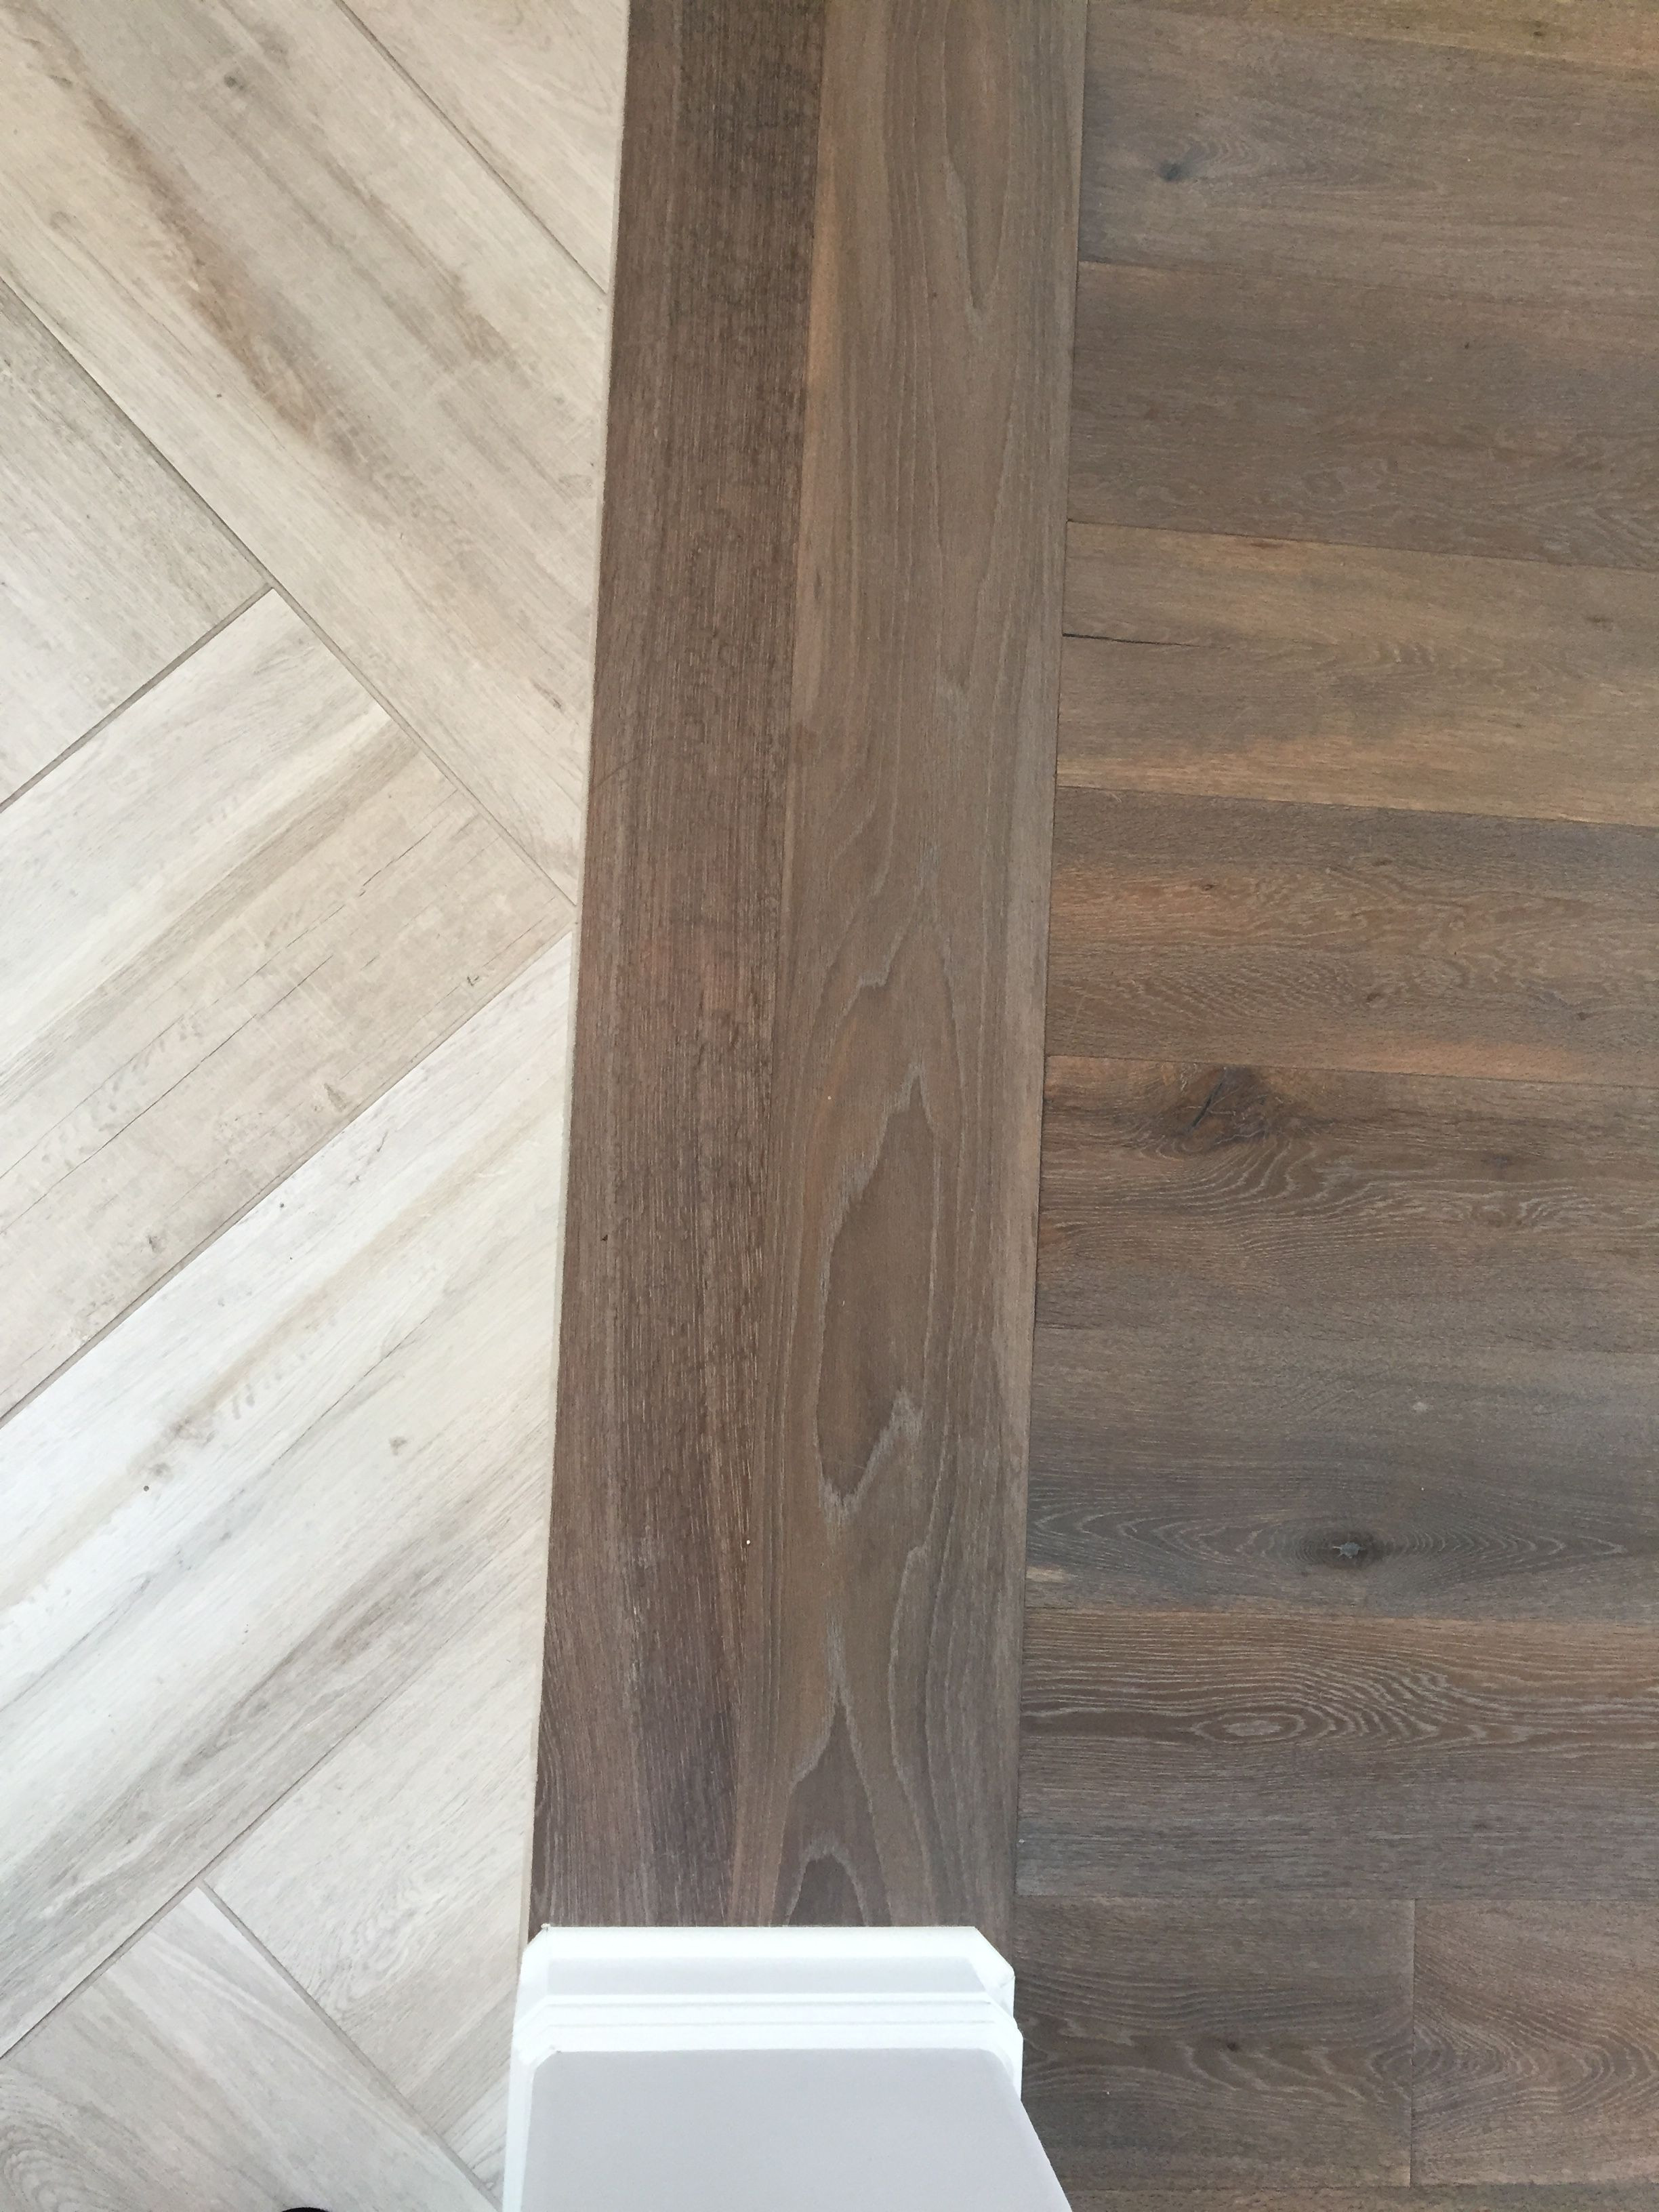 Hardwood Floor Reducer Of How to Make Wood Stain Fresh Floor Transition Laminate to with How to Make Wood Stain Fresh Floor Transition Laminate to Herringbone Tile Pattern